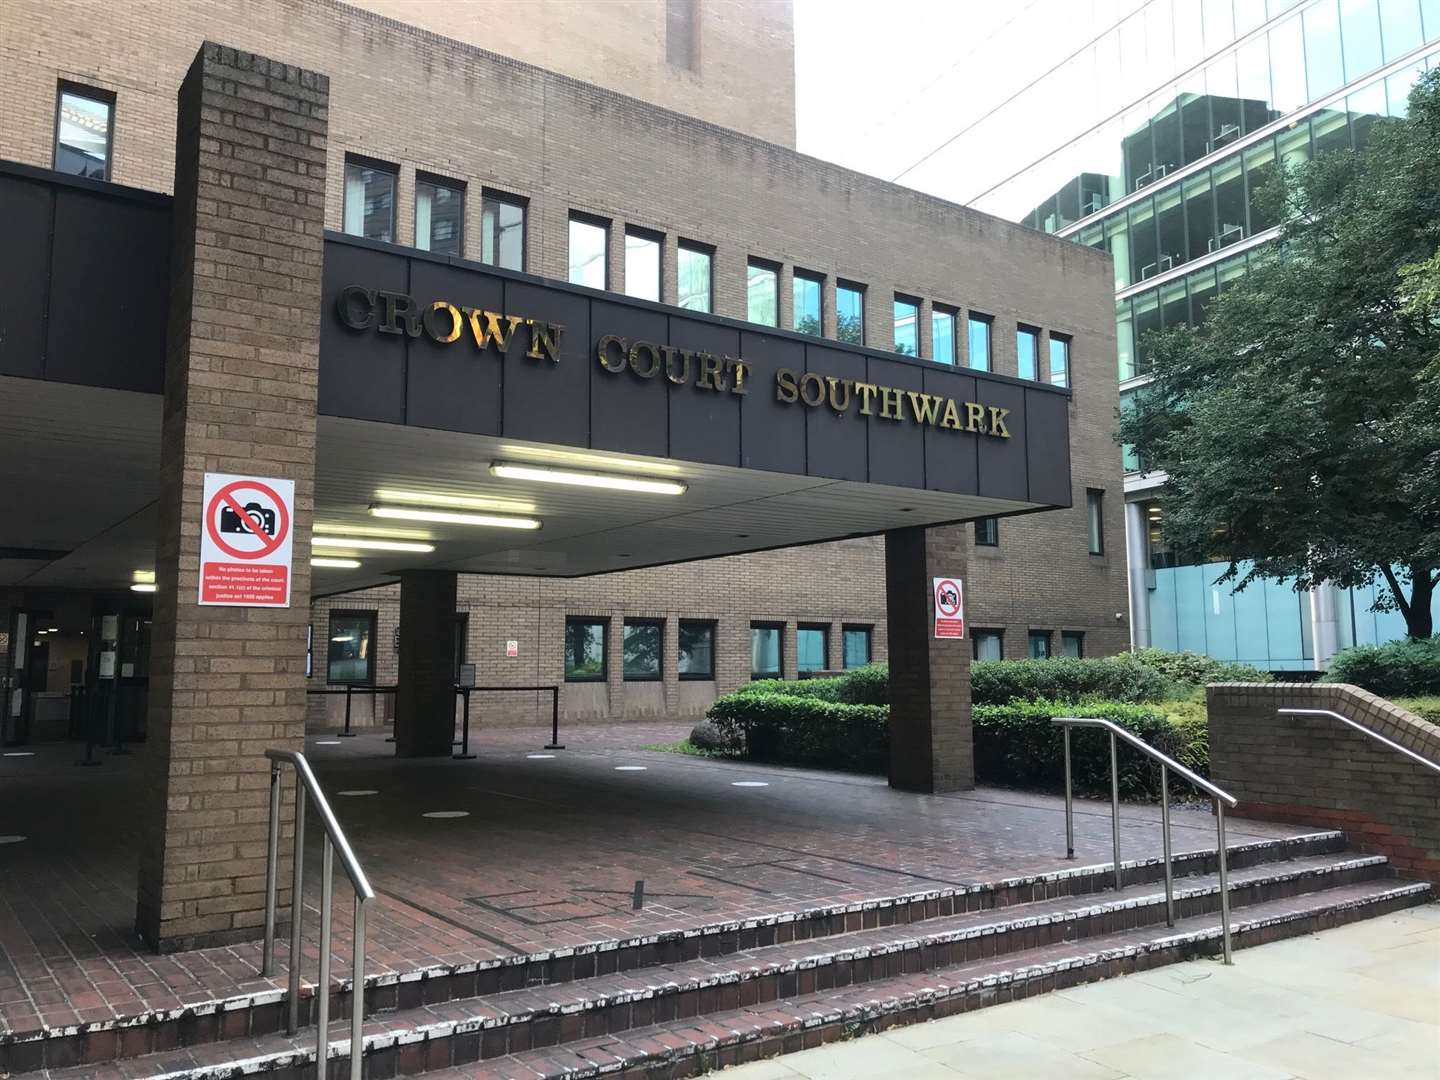 The case was heard at Southwark Crown Court